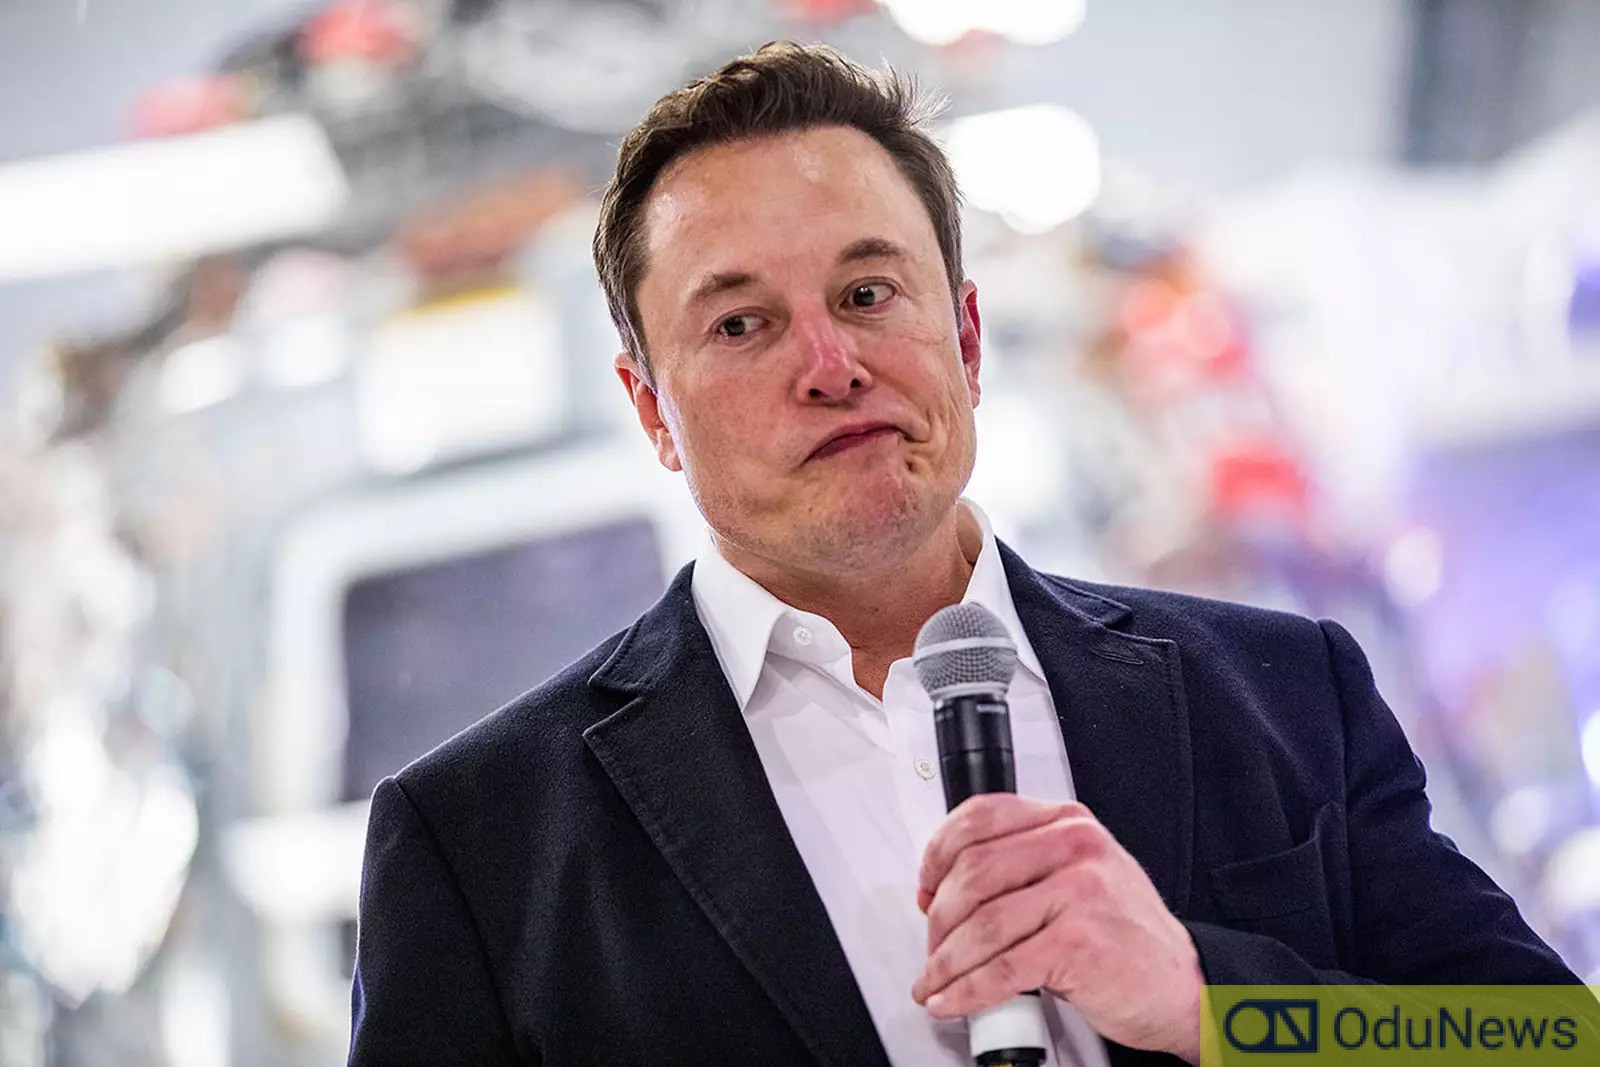 NO MORE REMOTE WORK: 'Come To Office or Quit' - Elon Musk To Employees  